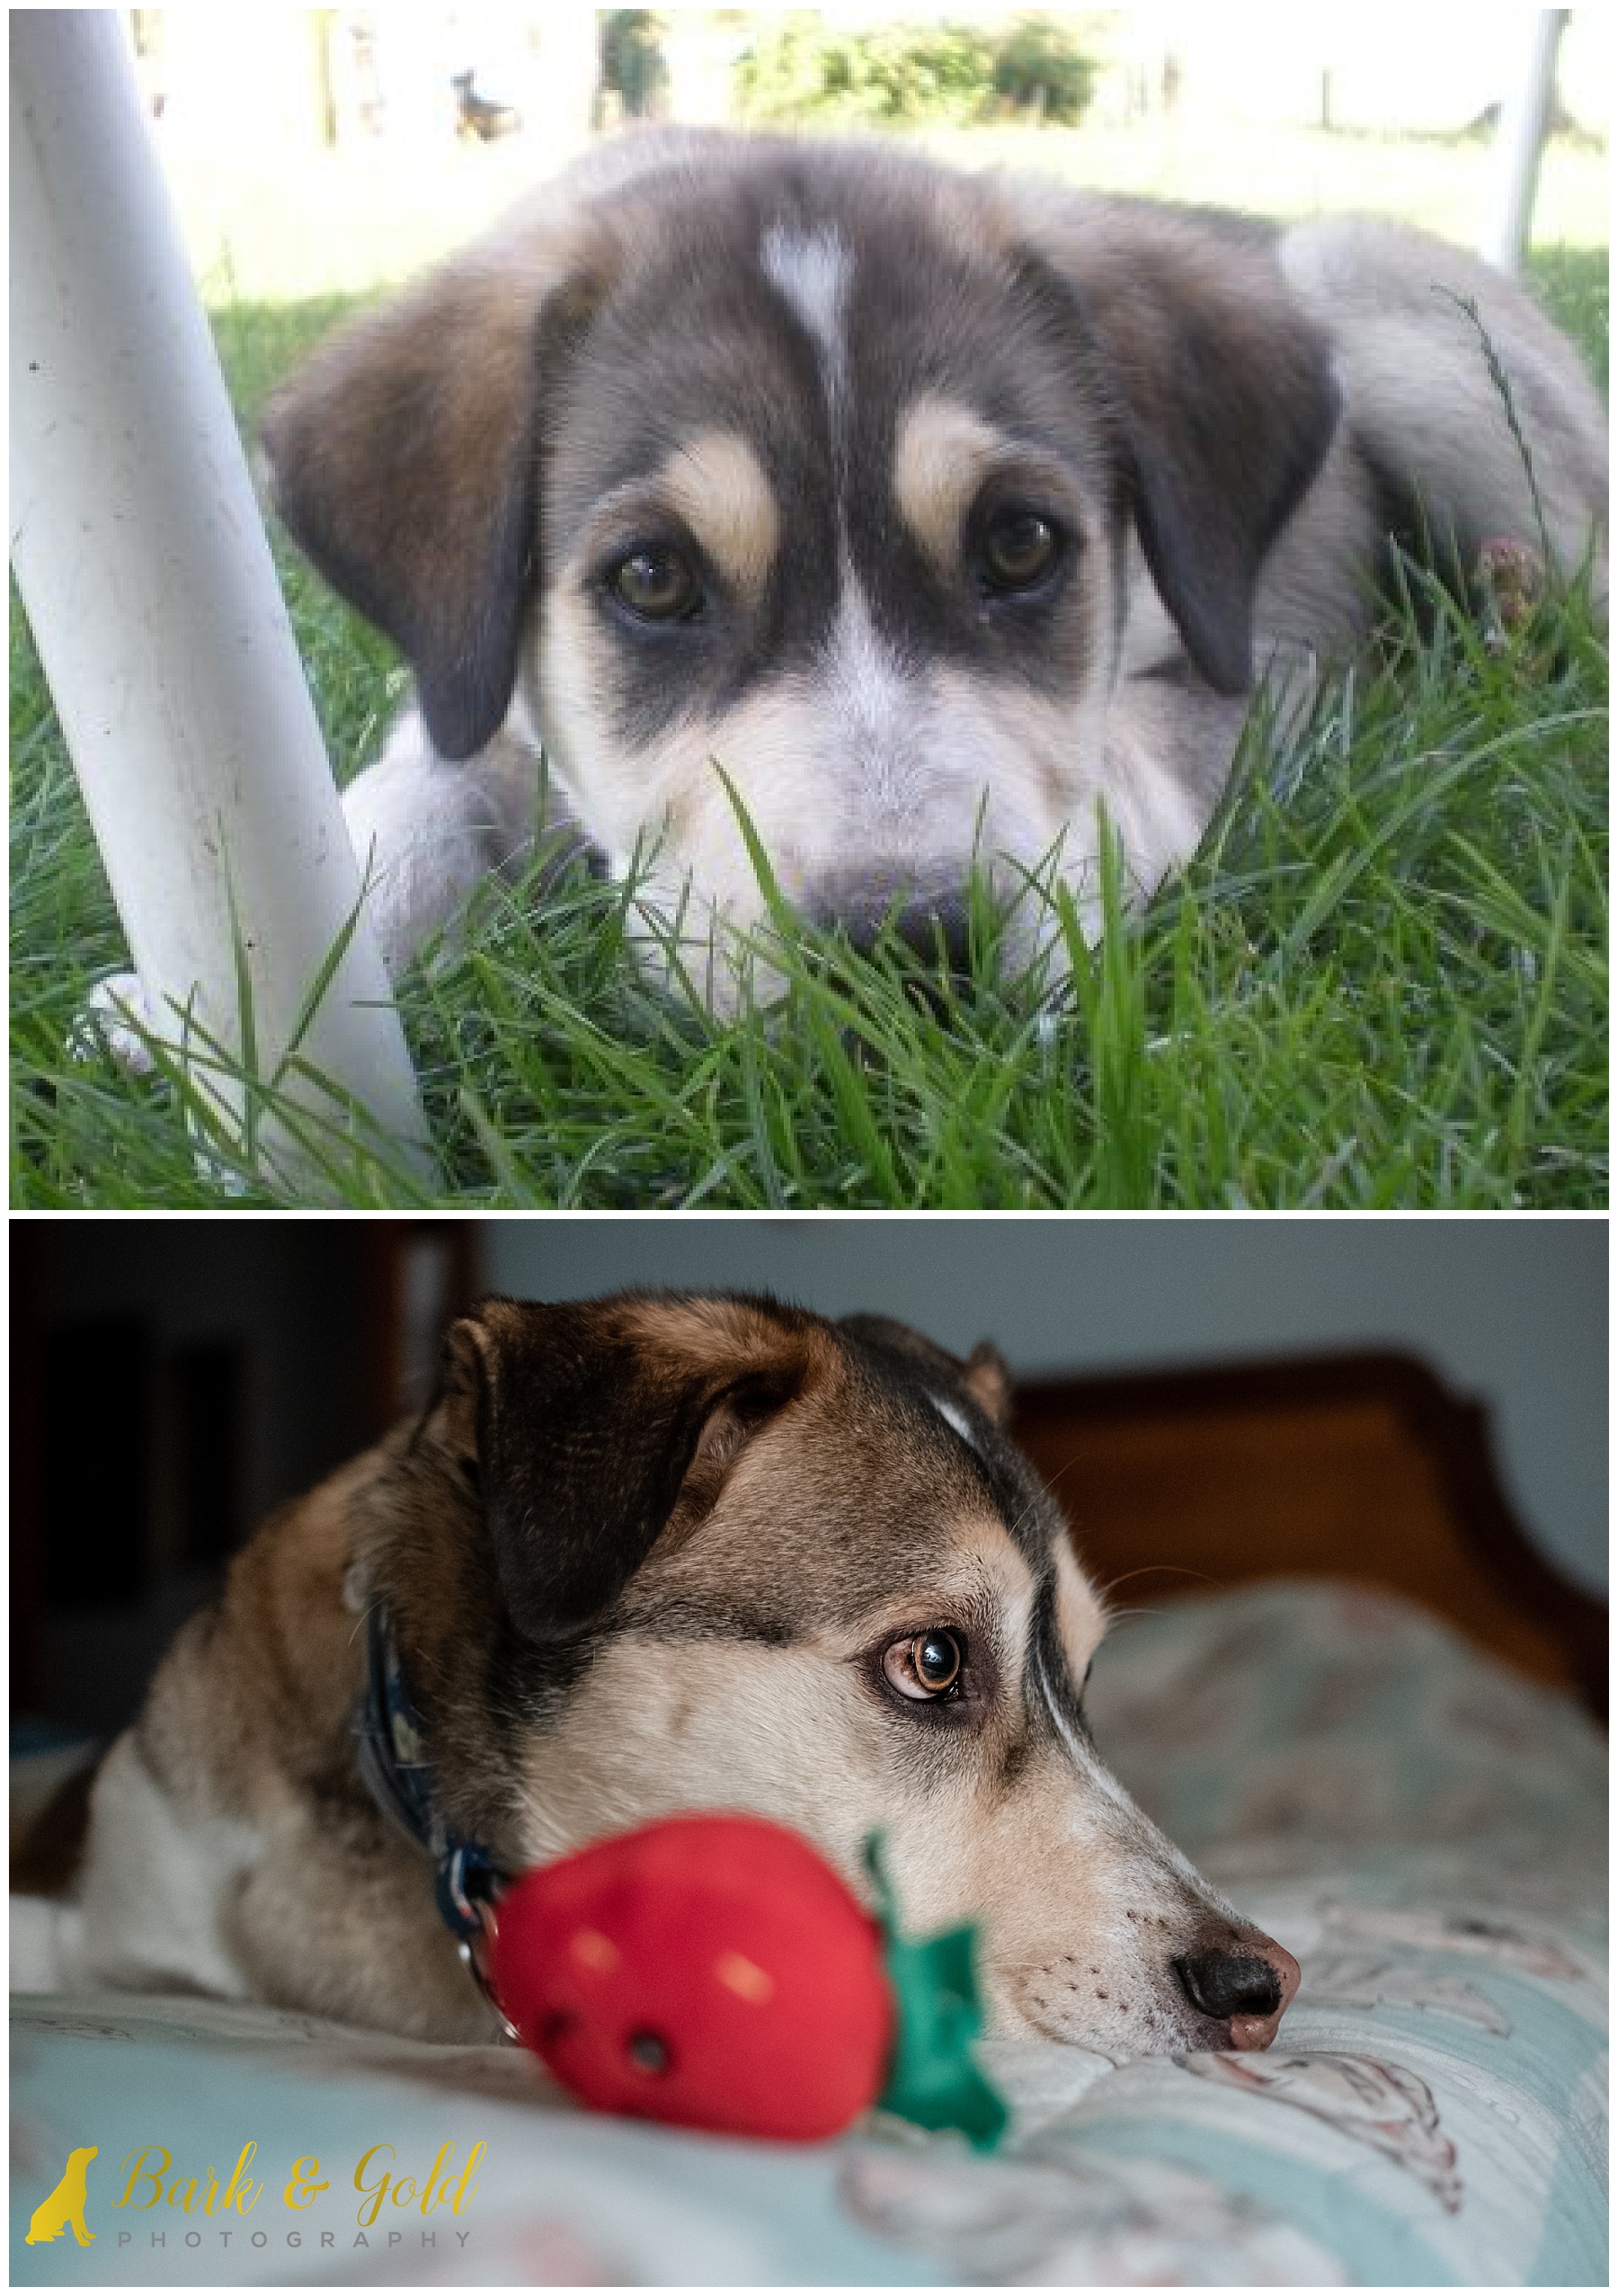 Hunter as a puppy and a senior